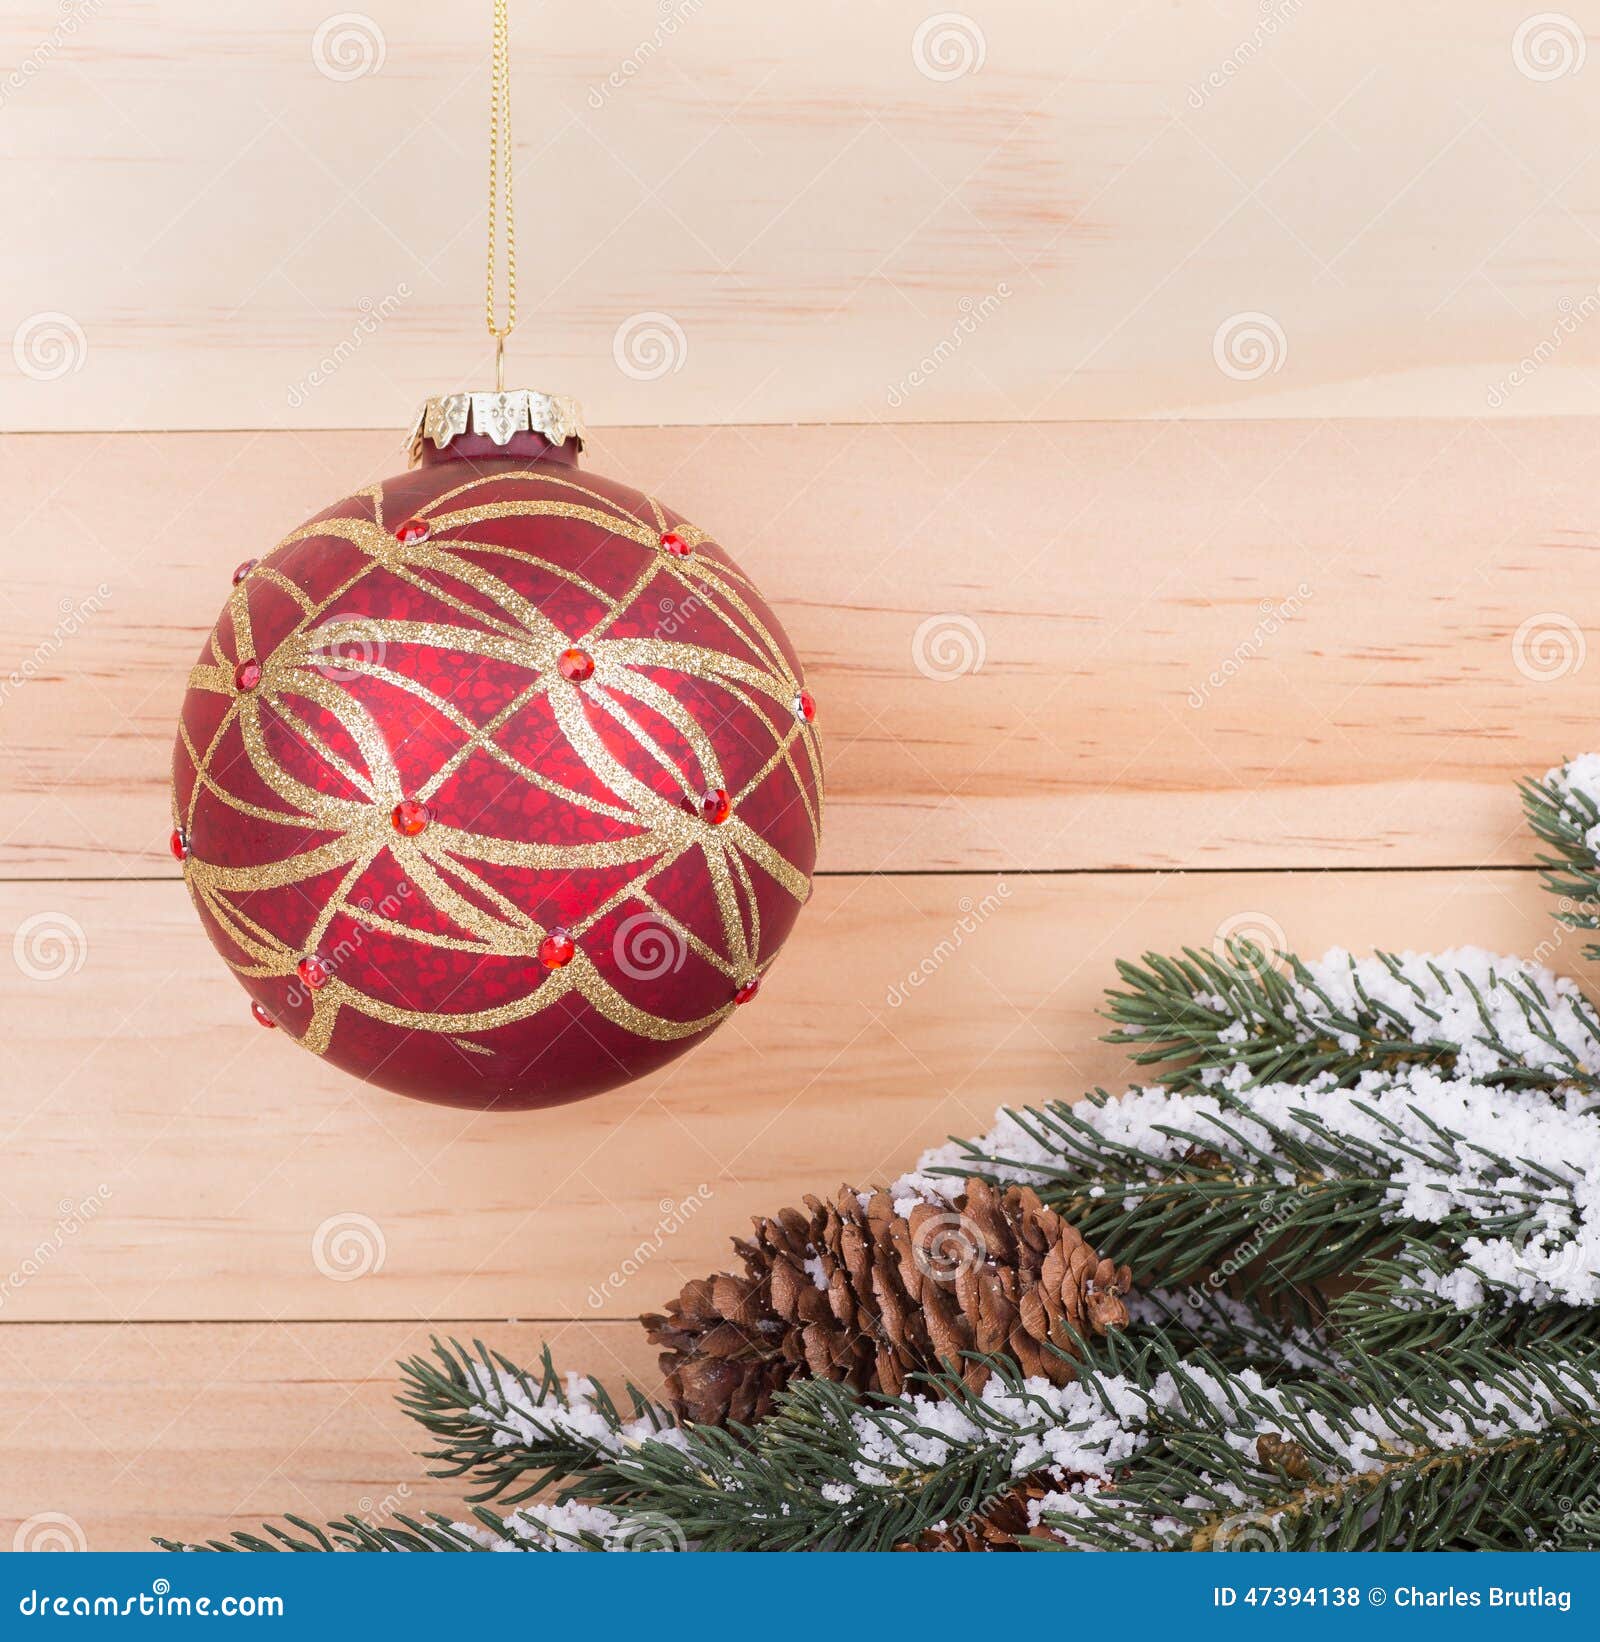 Red and Gold Christmas Ball Stock Photo - Image of decoration ...